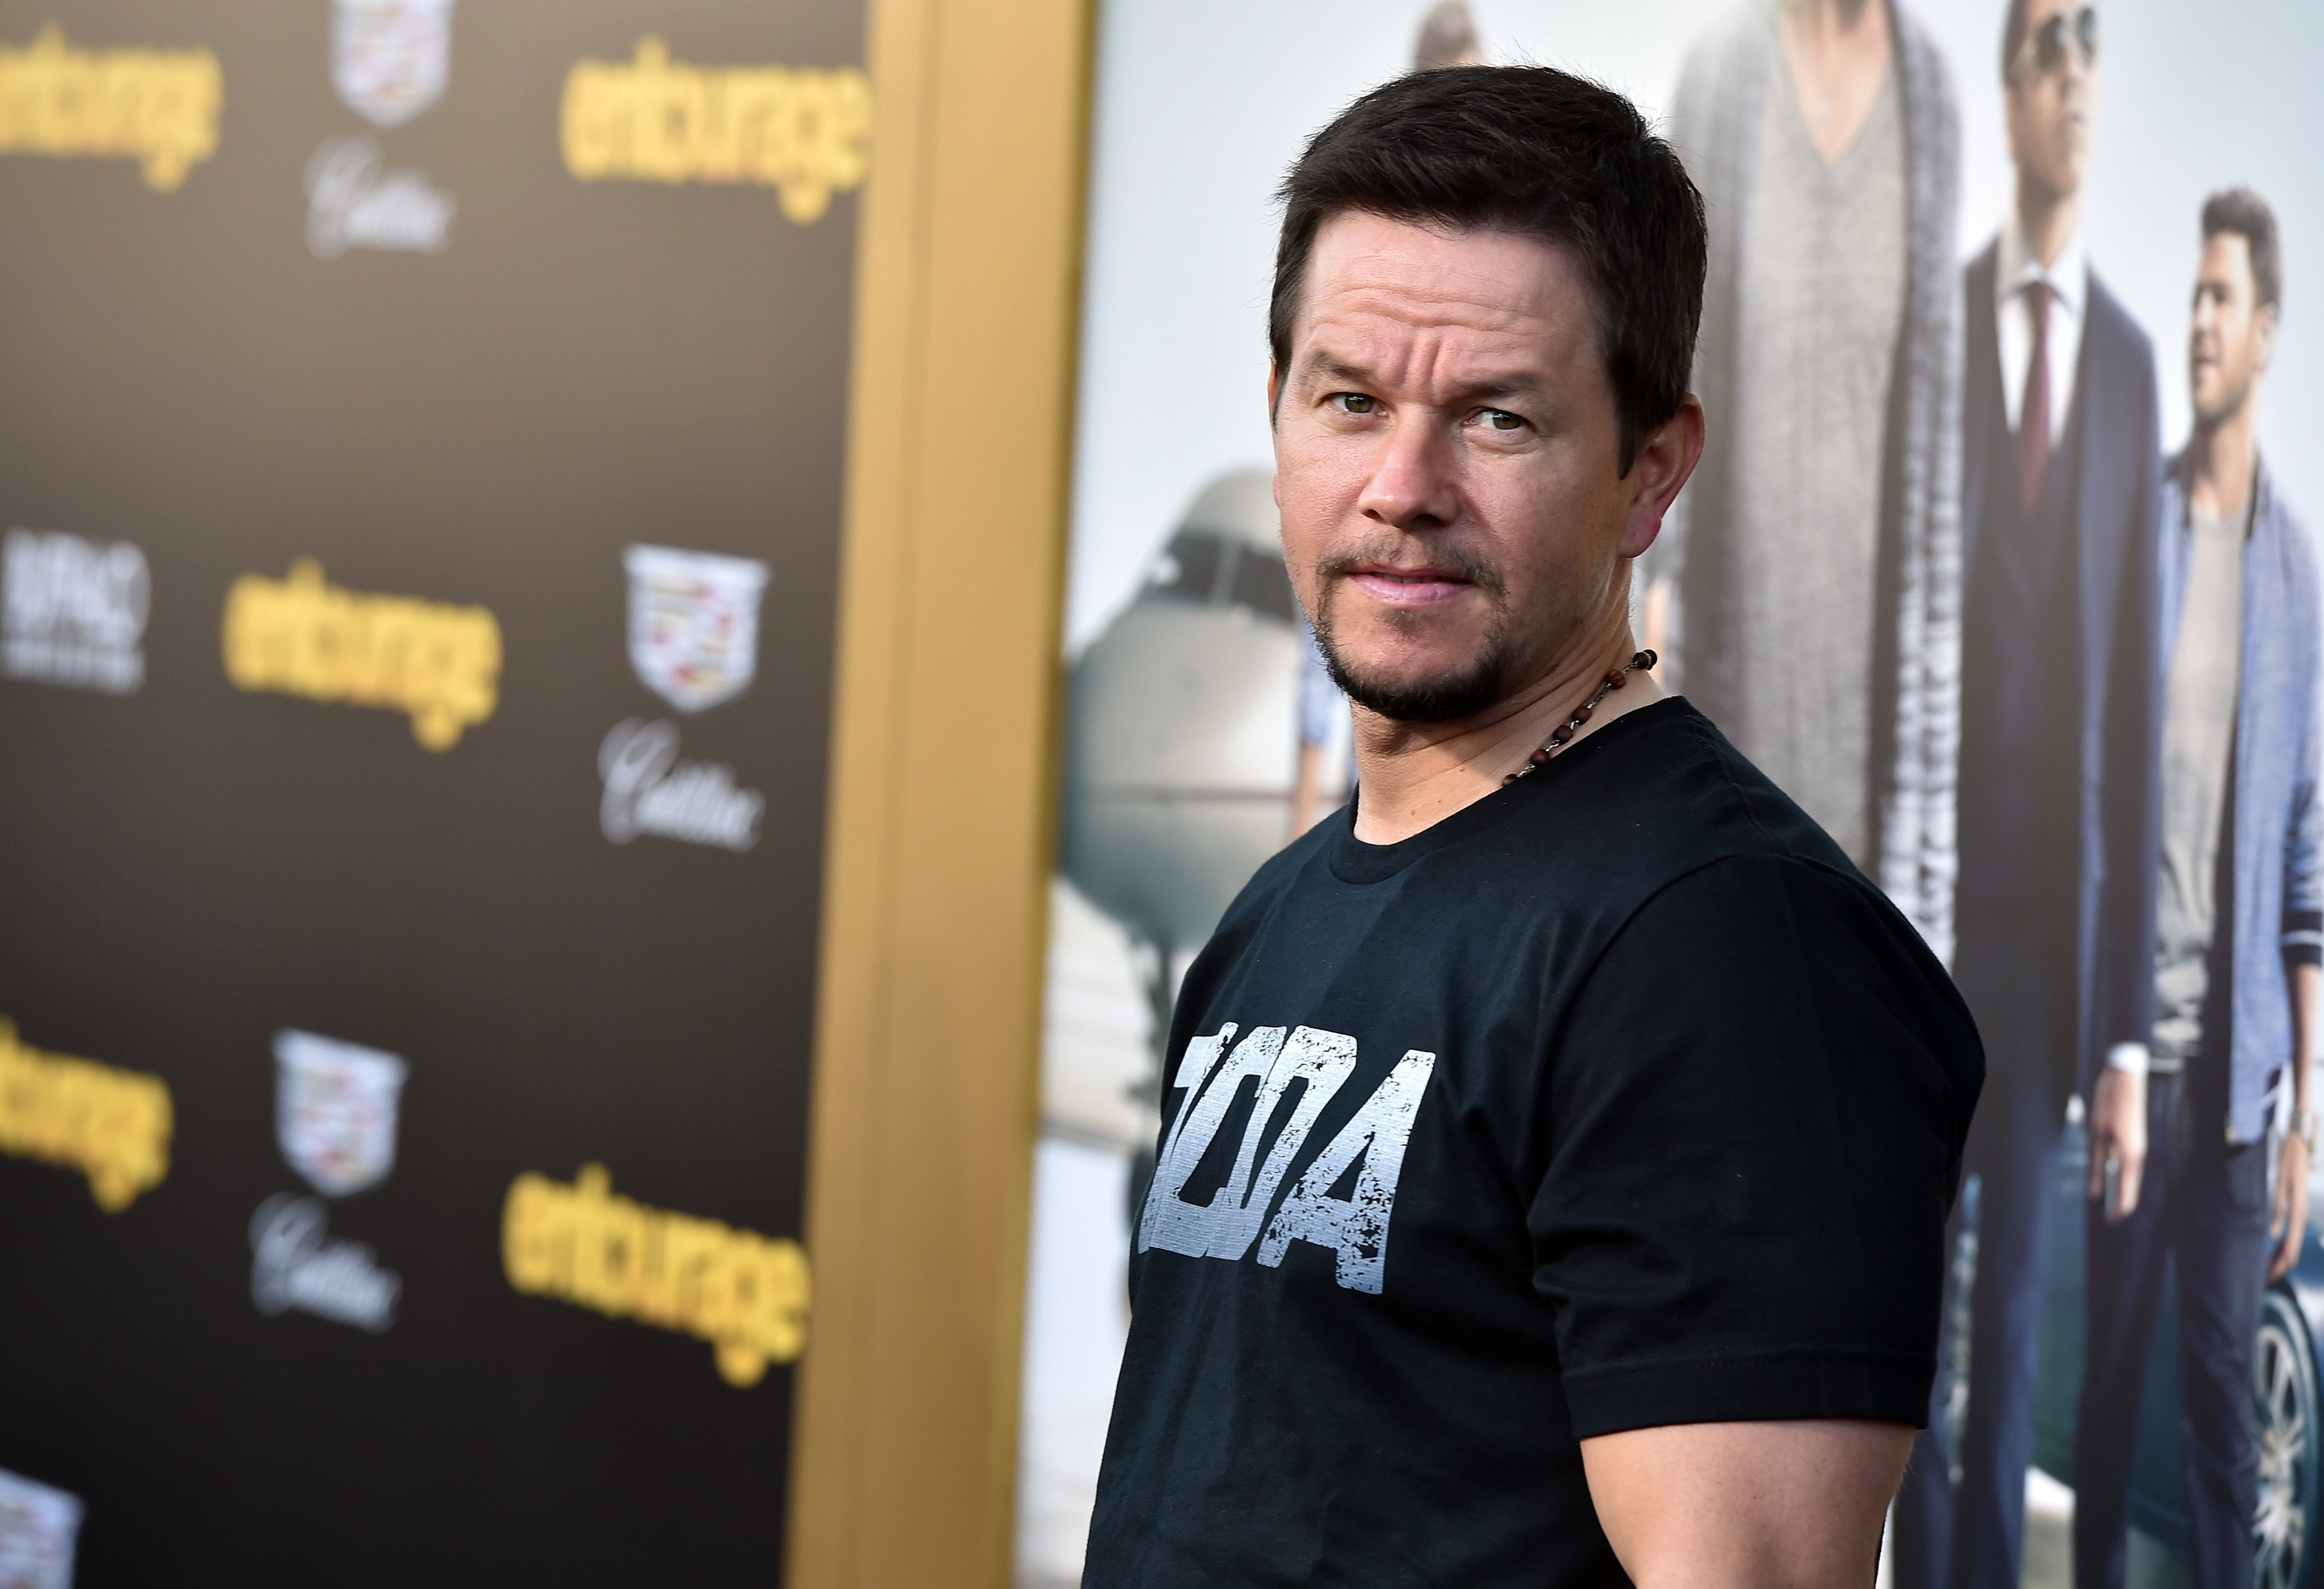 Mark Wahlberg attends the premiere of Warner Bros. Pictures' "Entourage" on June 1, 2015, in Westwood, California. | Source: Getty Images.